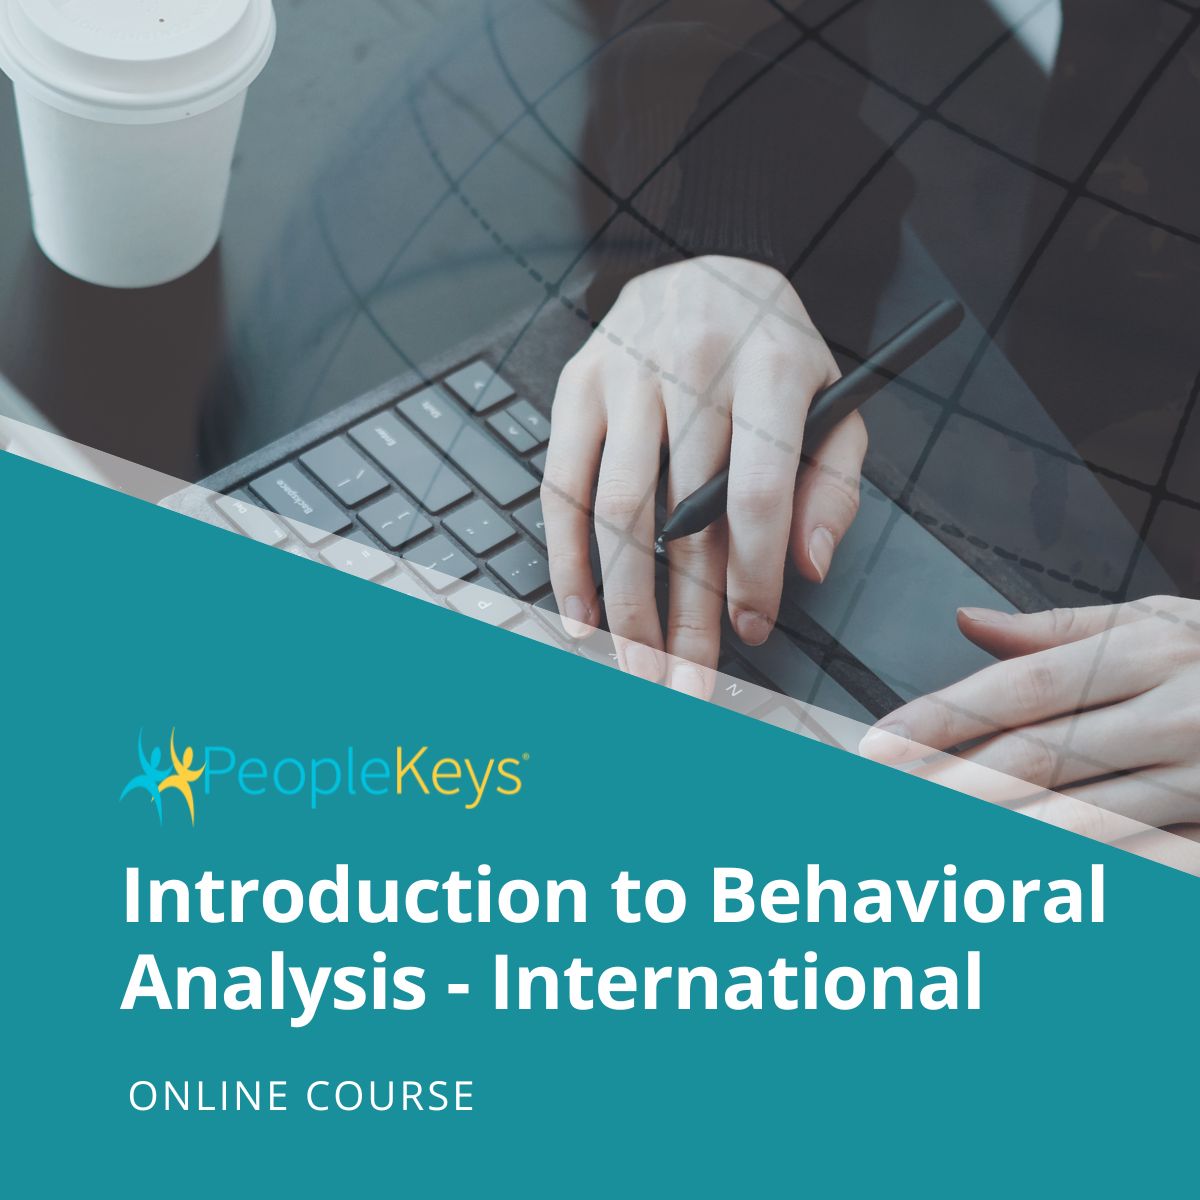 Introduction to Behavioral Analysis - International Course (Online)